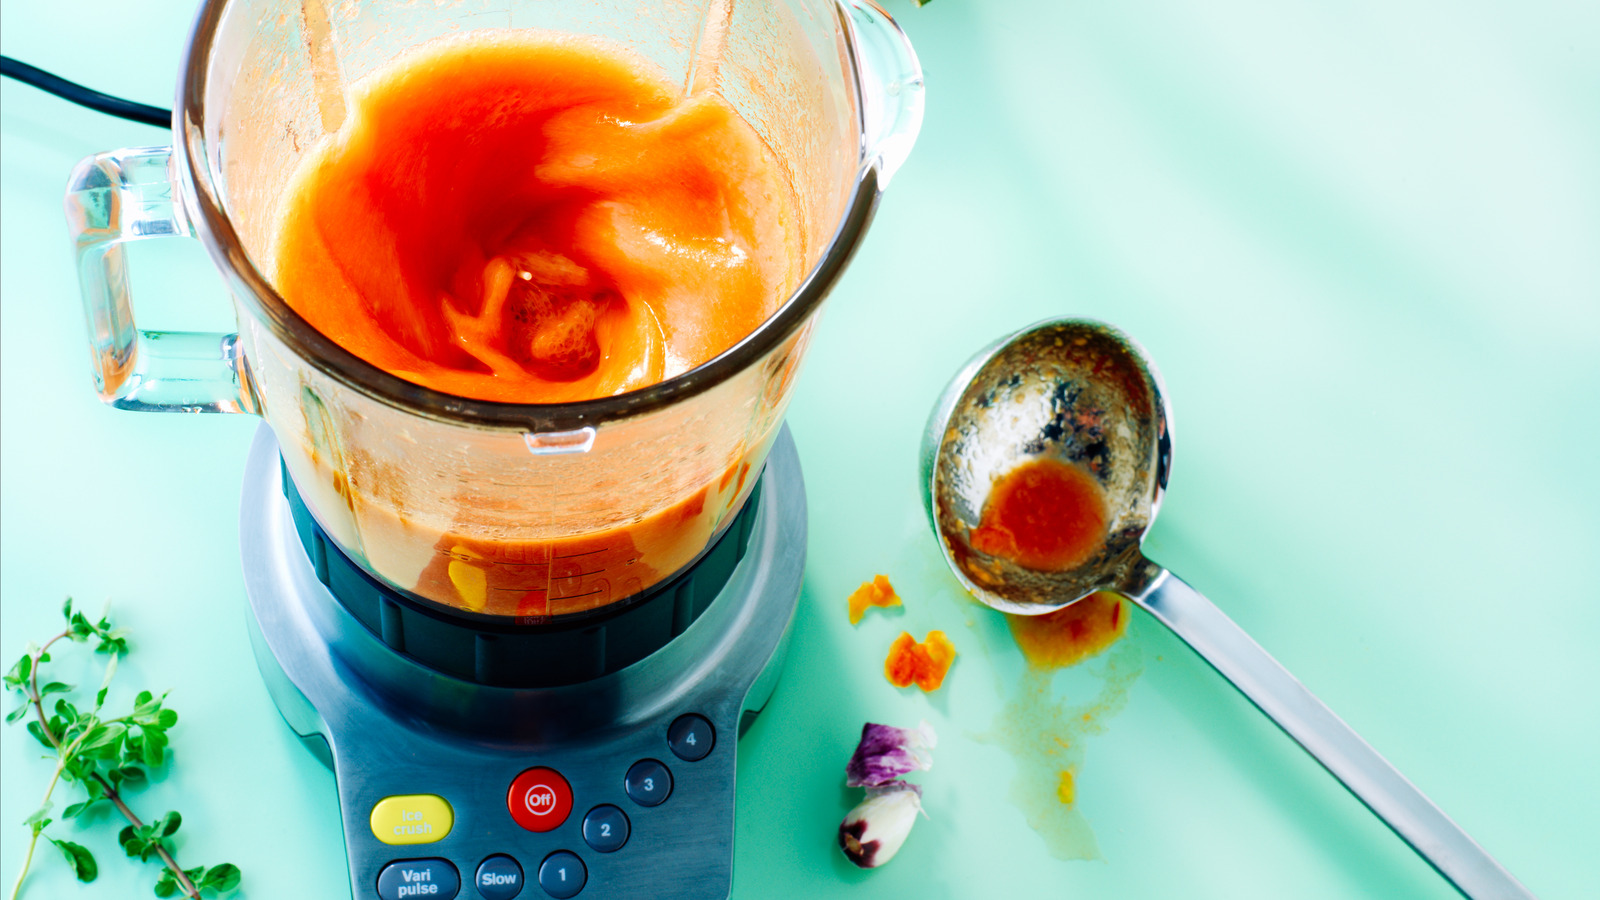 You Should Never Put Hot Food In A Blender. Here's Why